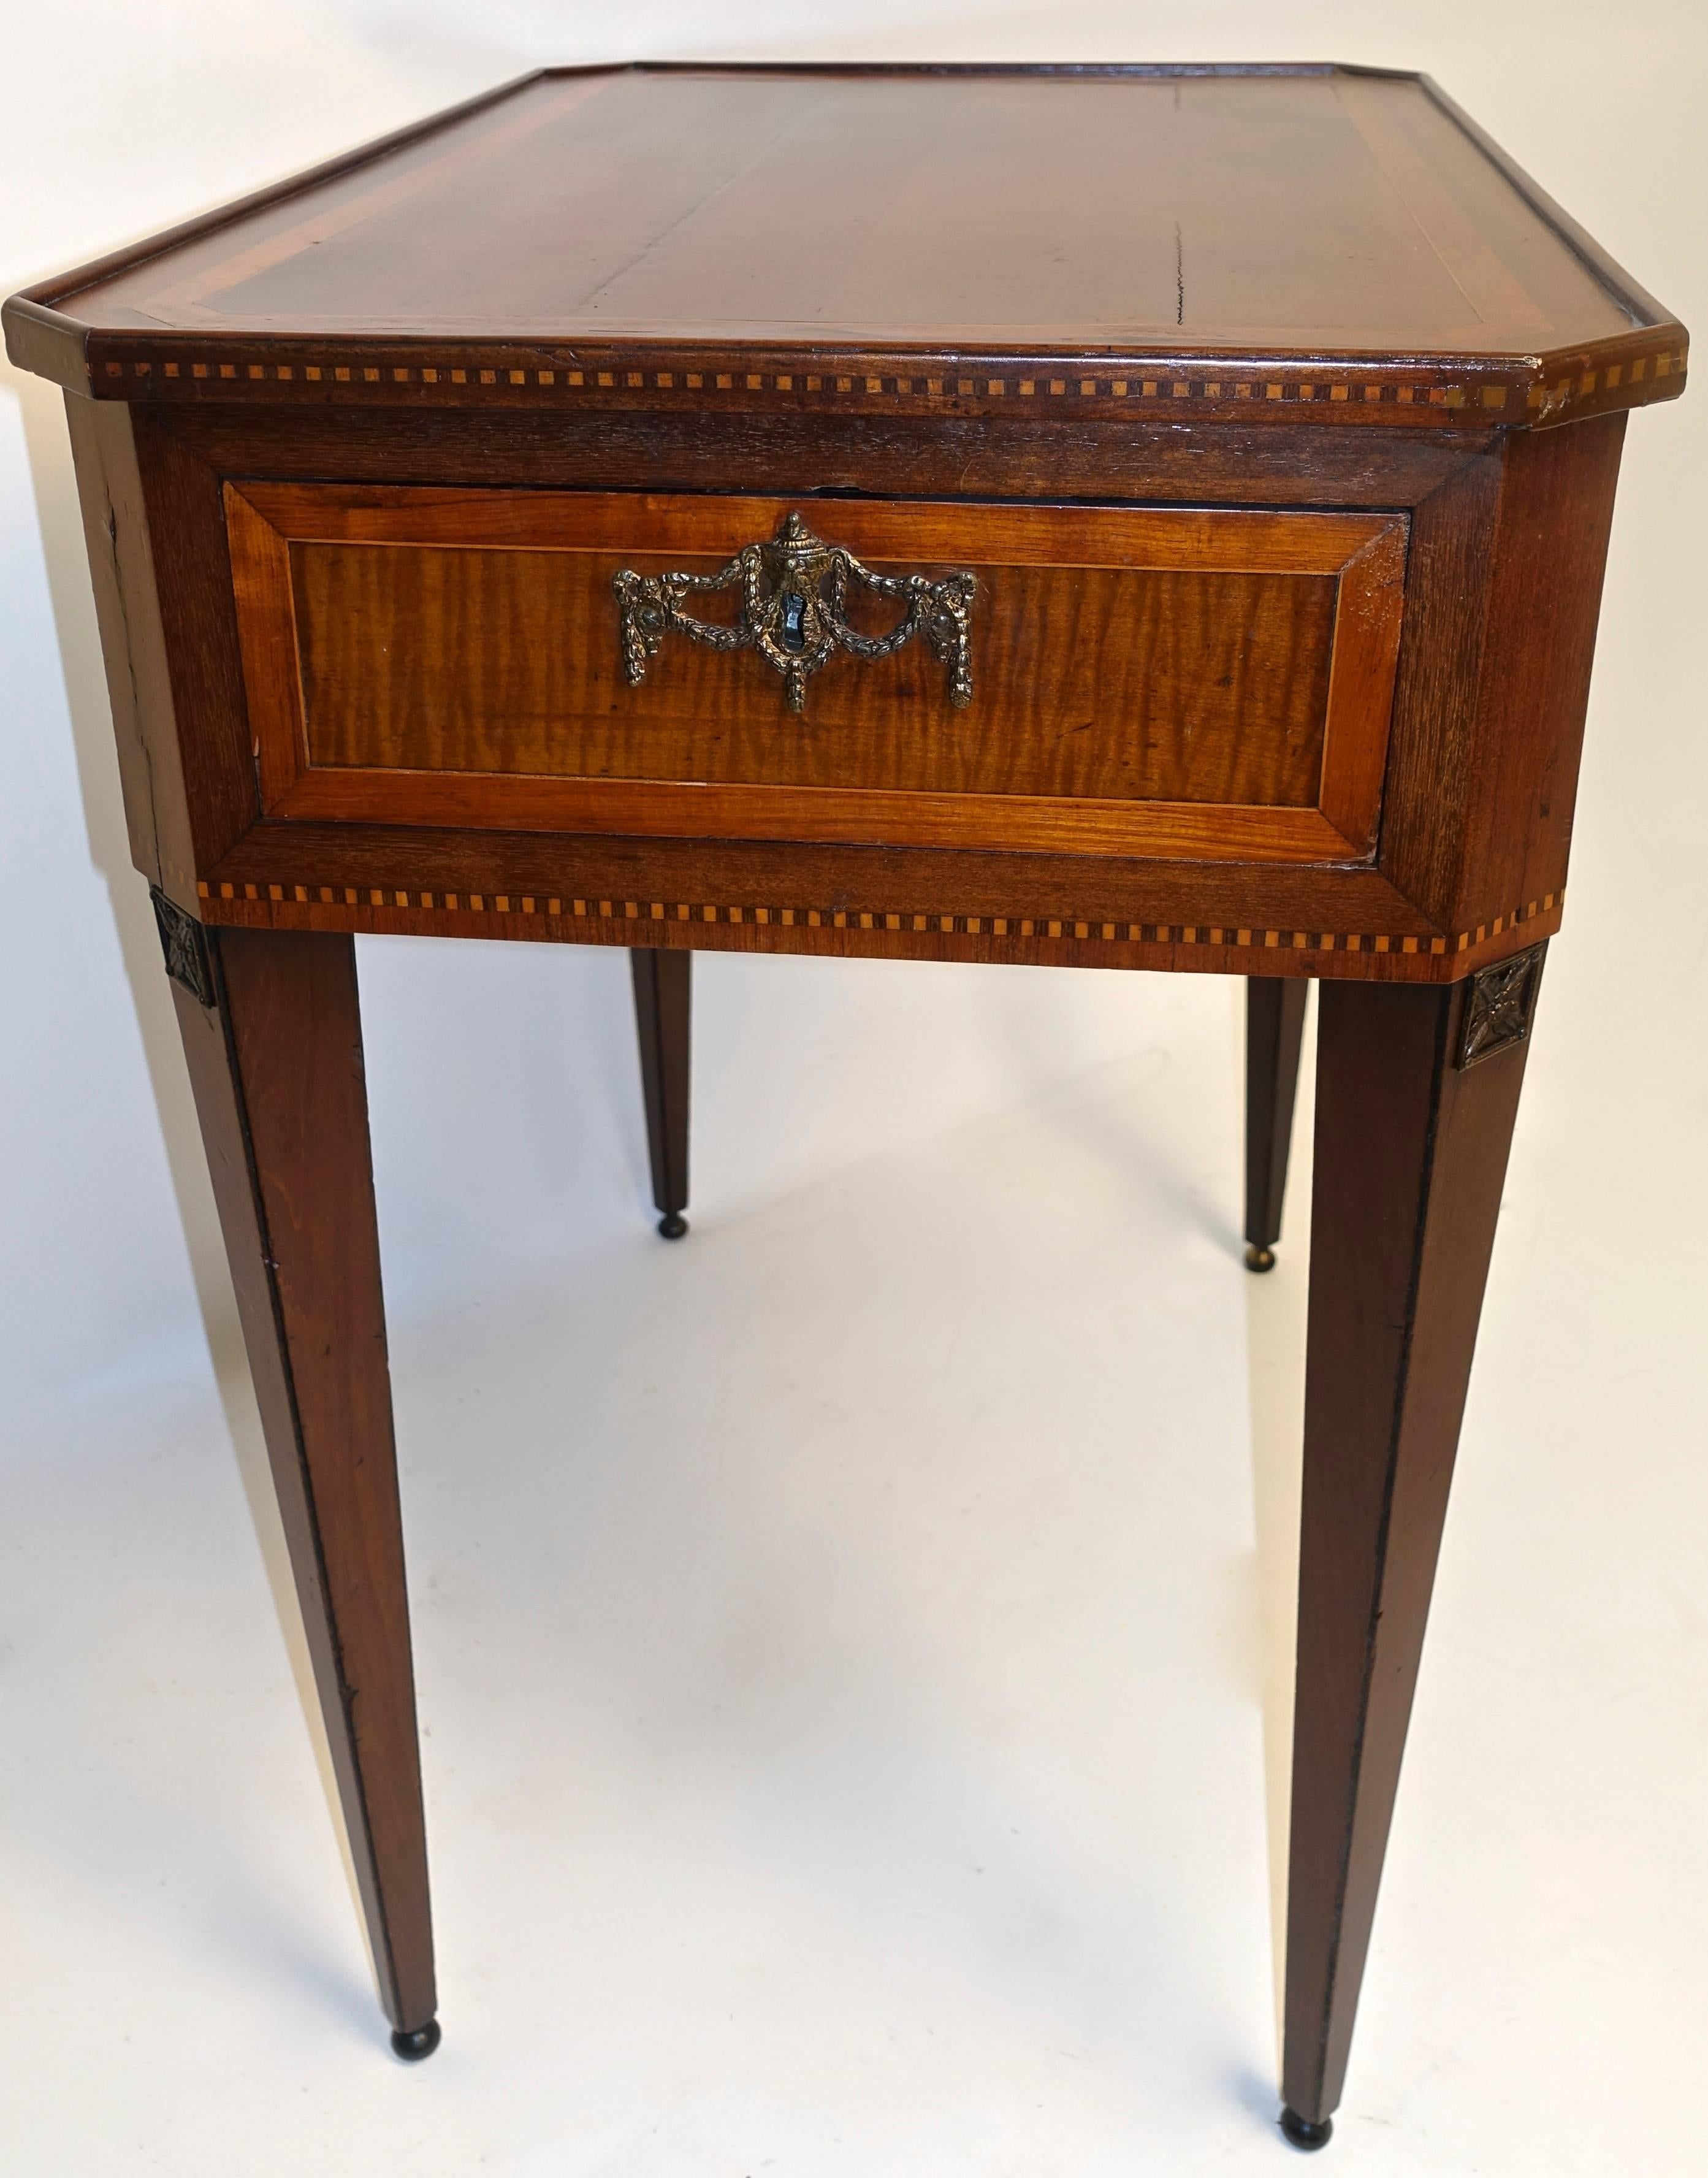 Brass Neoclassical Mahogany and Satinwood Inlay Tray Top Table Dutch, 19th Century For Sale